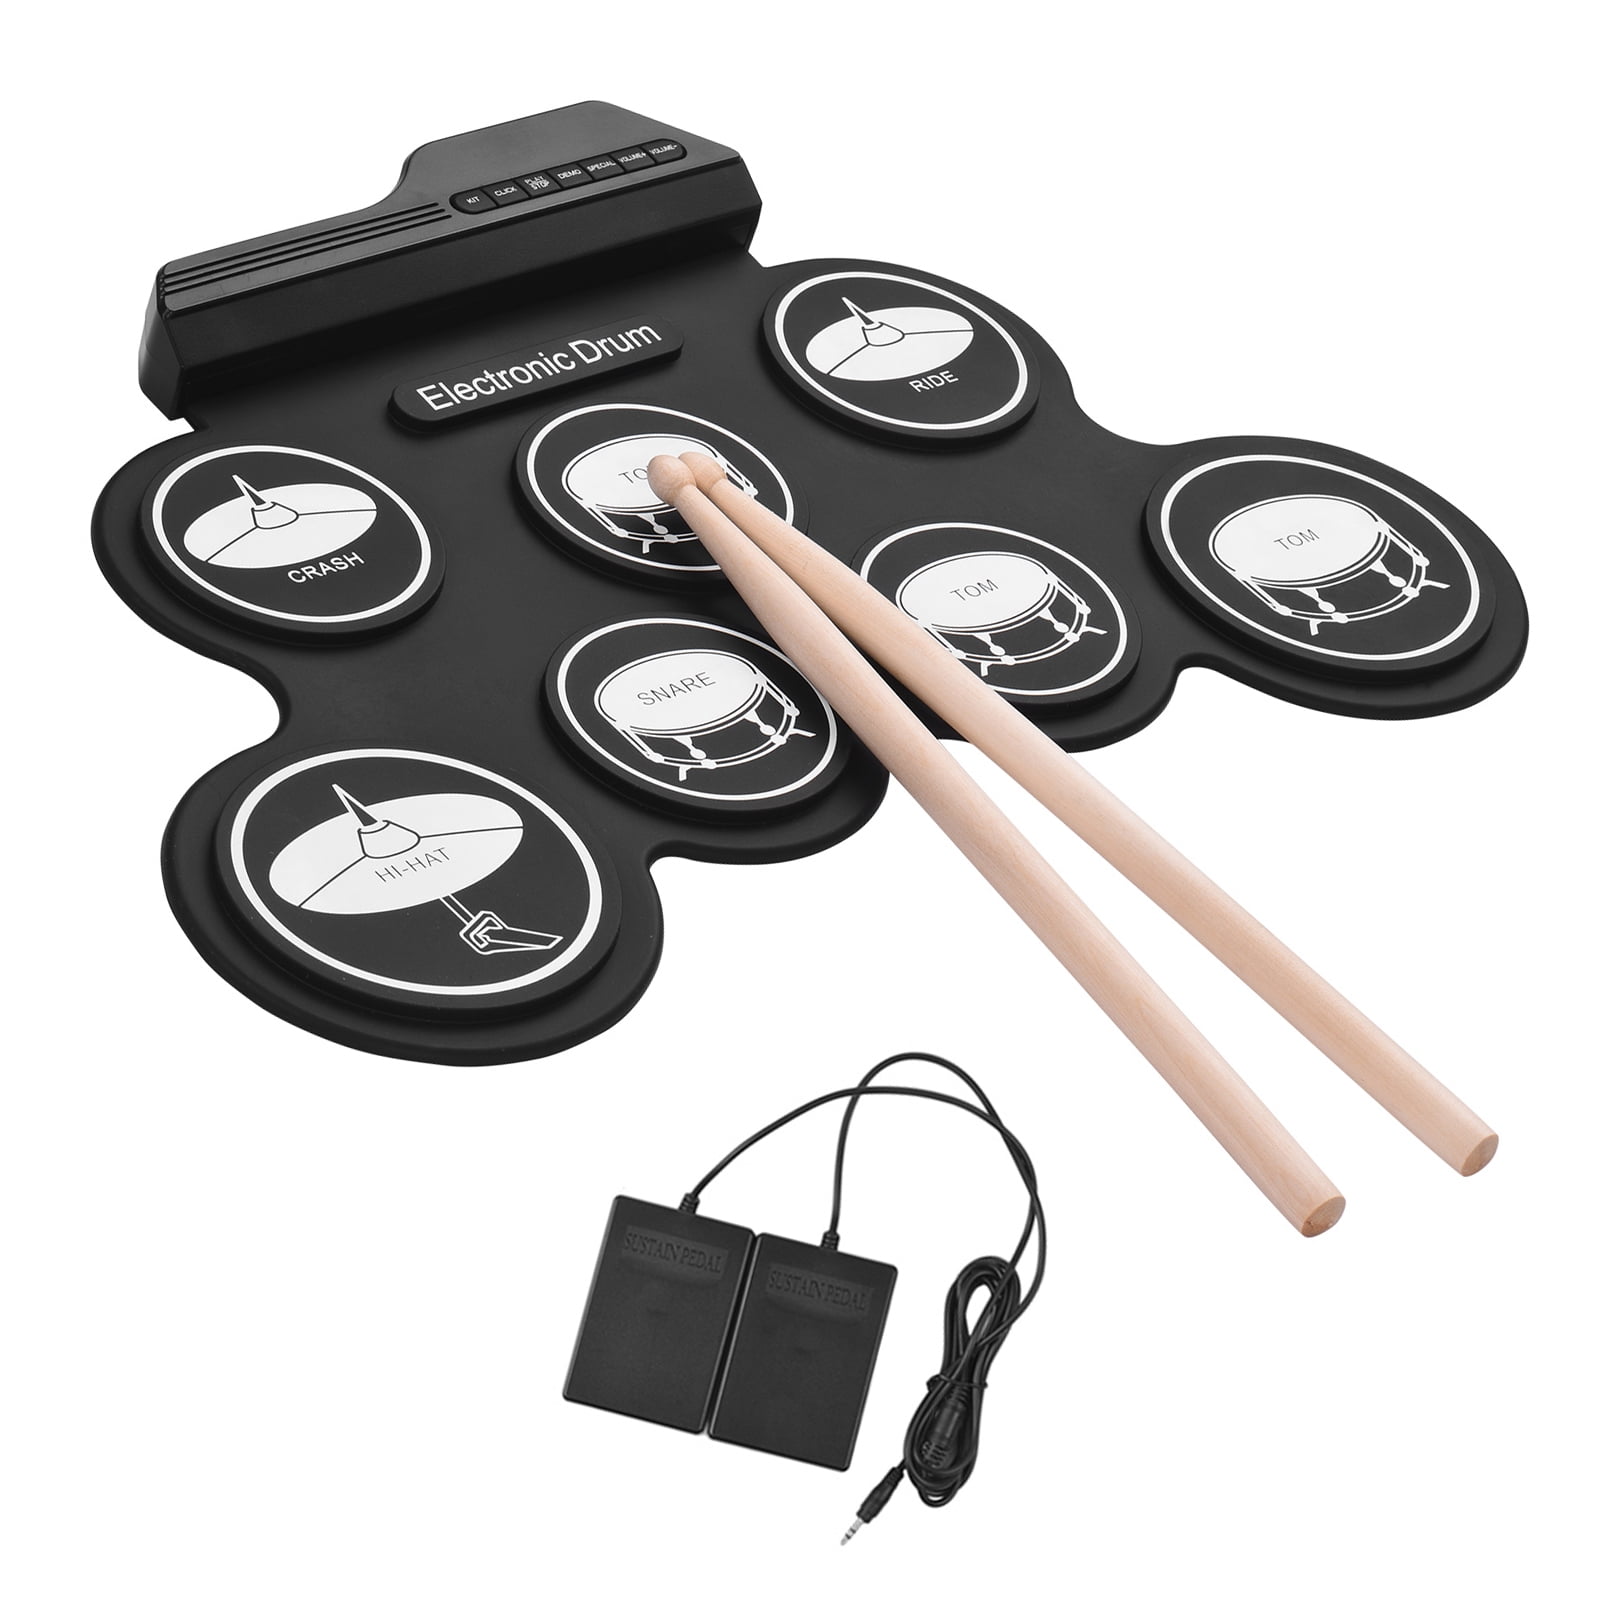  AeroBand PocketDrum 2 Plus Electric Air Drum Set Sticks, with  Drumsticks, Pedals, Bluetooth and 8 Sounds, USB MIDI Function, Electronic  Drums for Adults, Kids, Gift : Musical Instruments